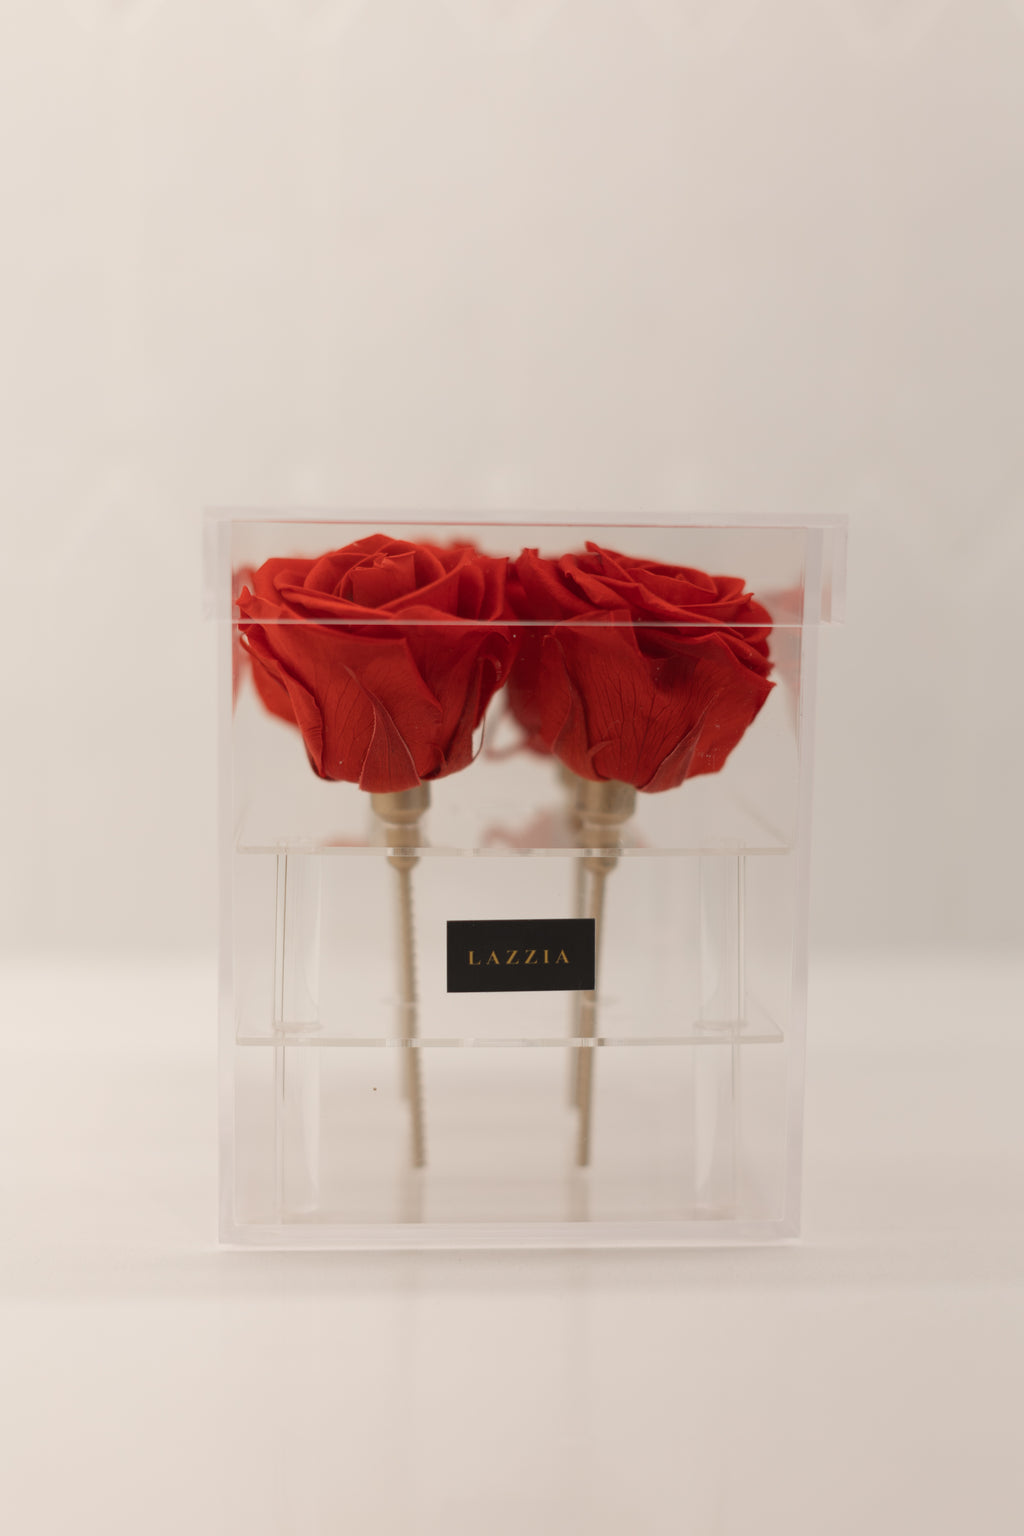 FOREVER Signature Collection - 4 Roses in a Square Box